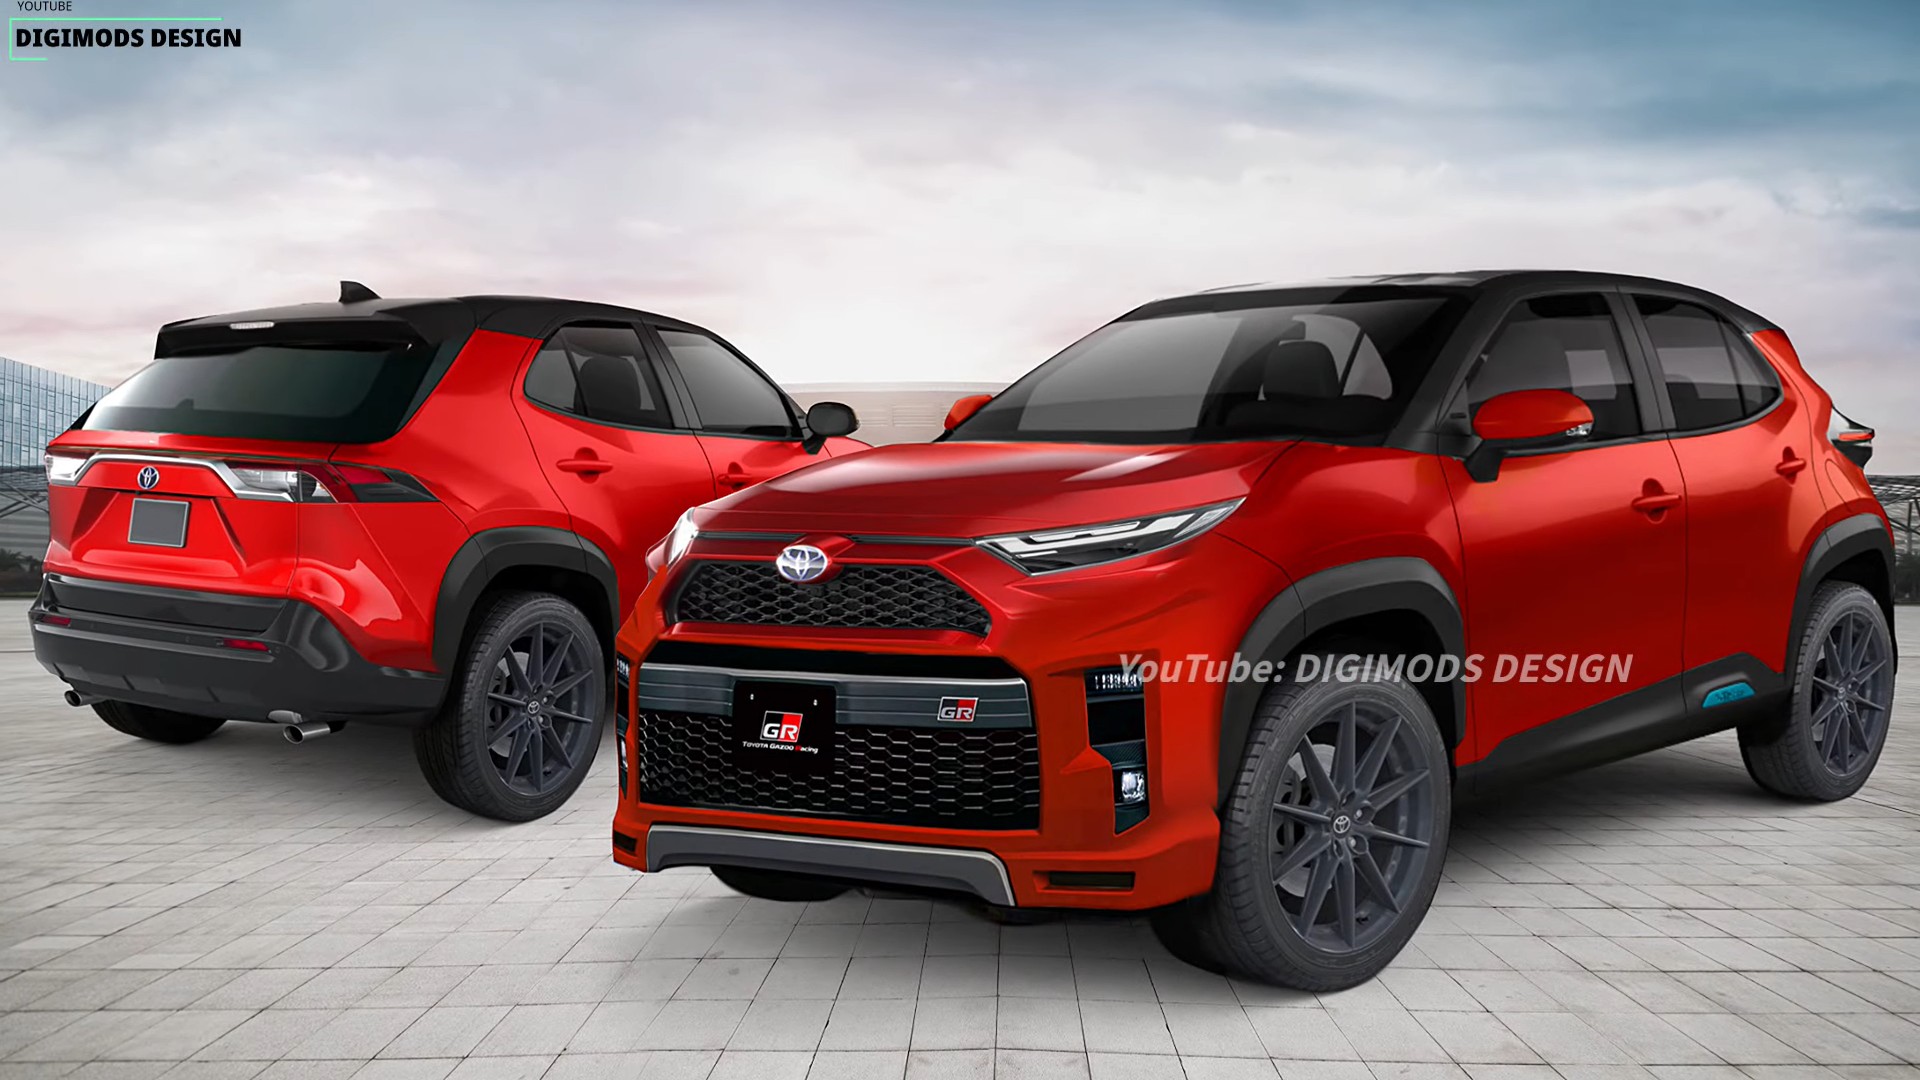 Should Toyota Build a GR Yaris Cross Sporty CUV, and Could It Look Like  This, Please? - autoevolution